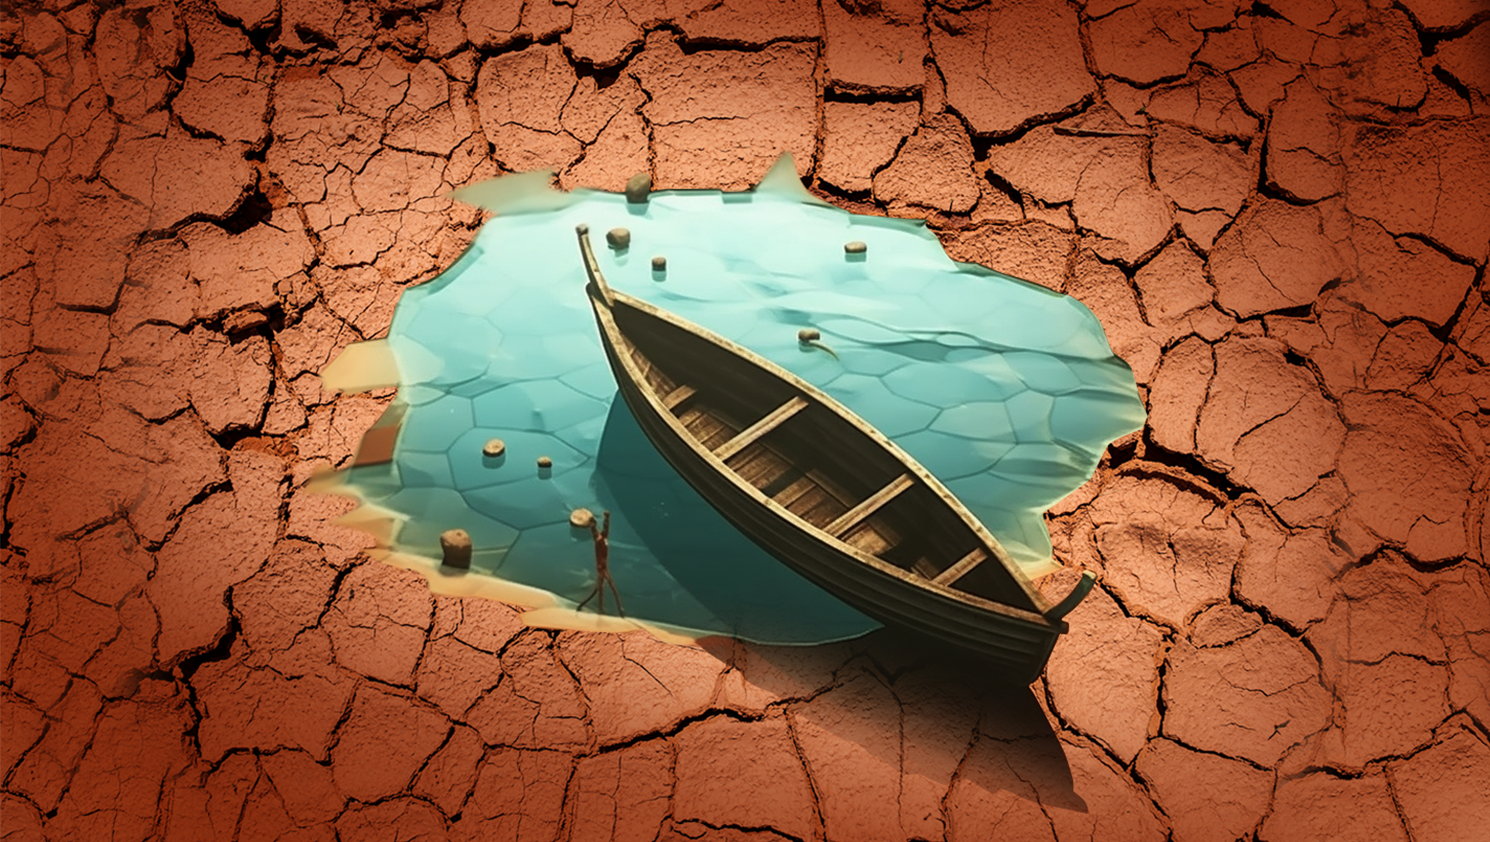 A boat in a puddle surrounded by cracked earth.